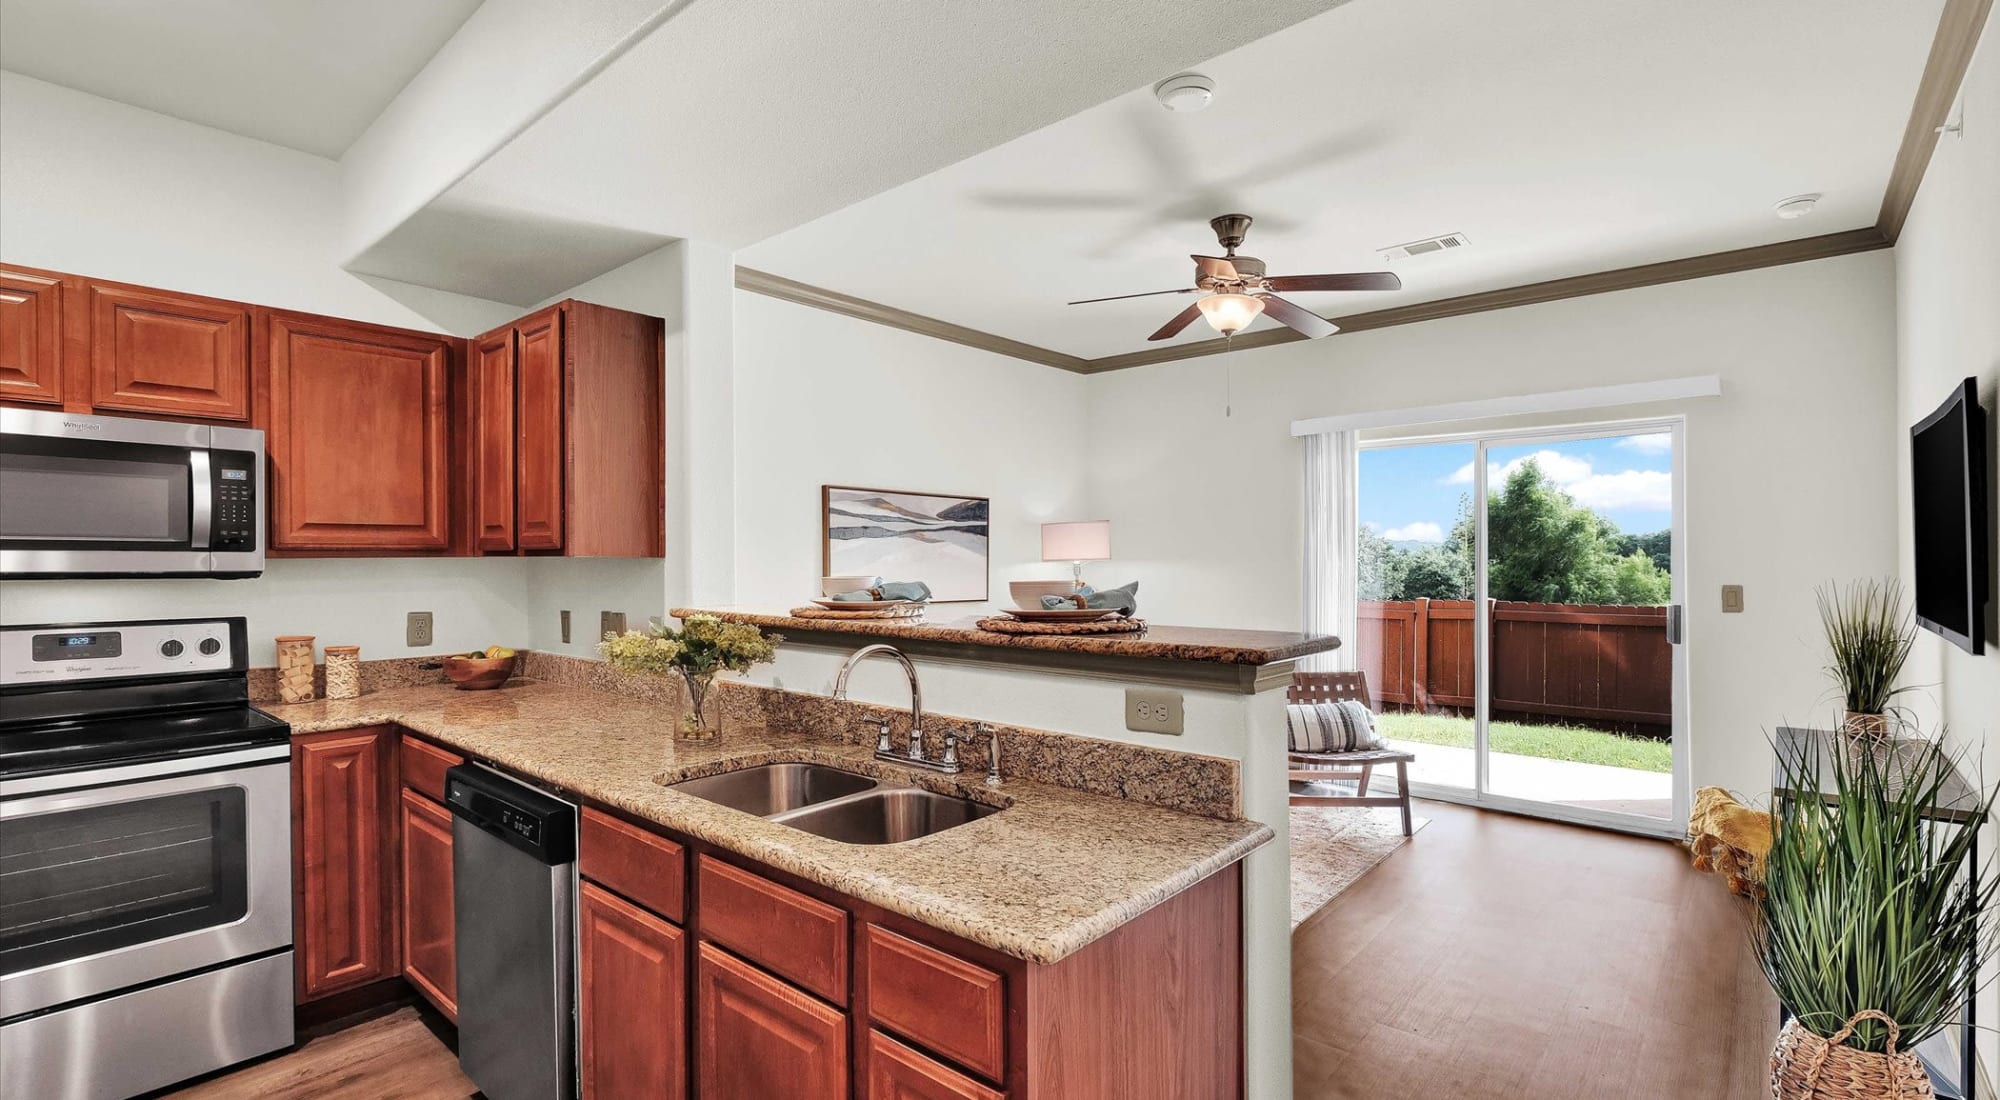 Kitchen with stainless steel appliances at Villas at Westover Hills